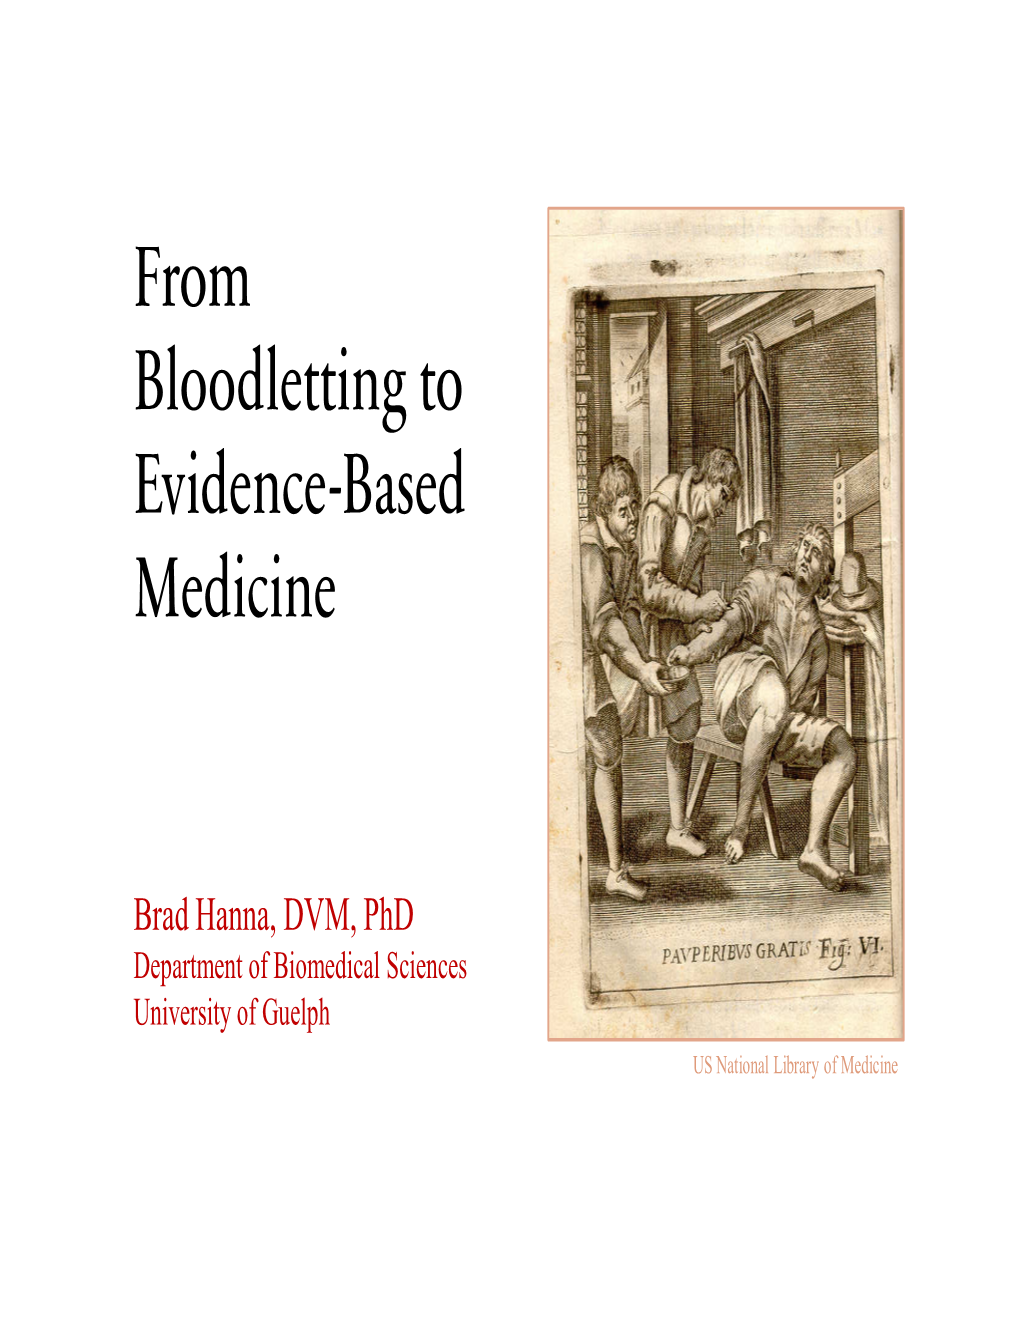 From Bloodletting to Evidence-Based Medicine